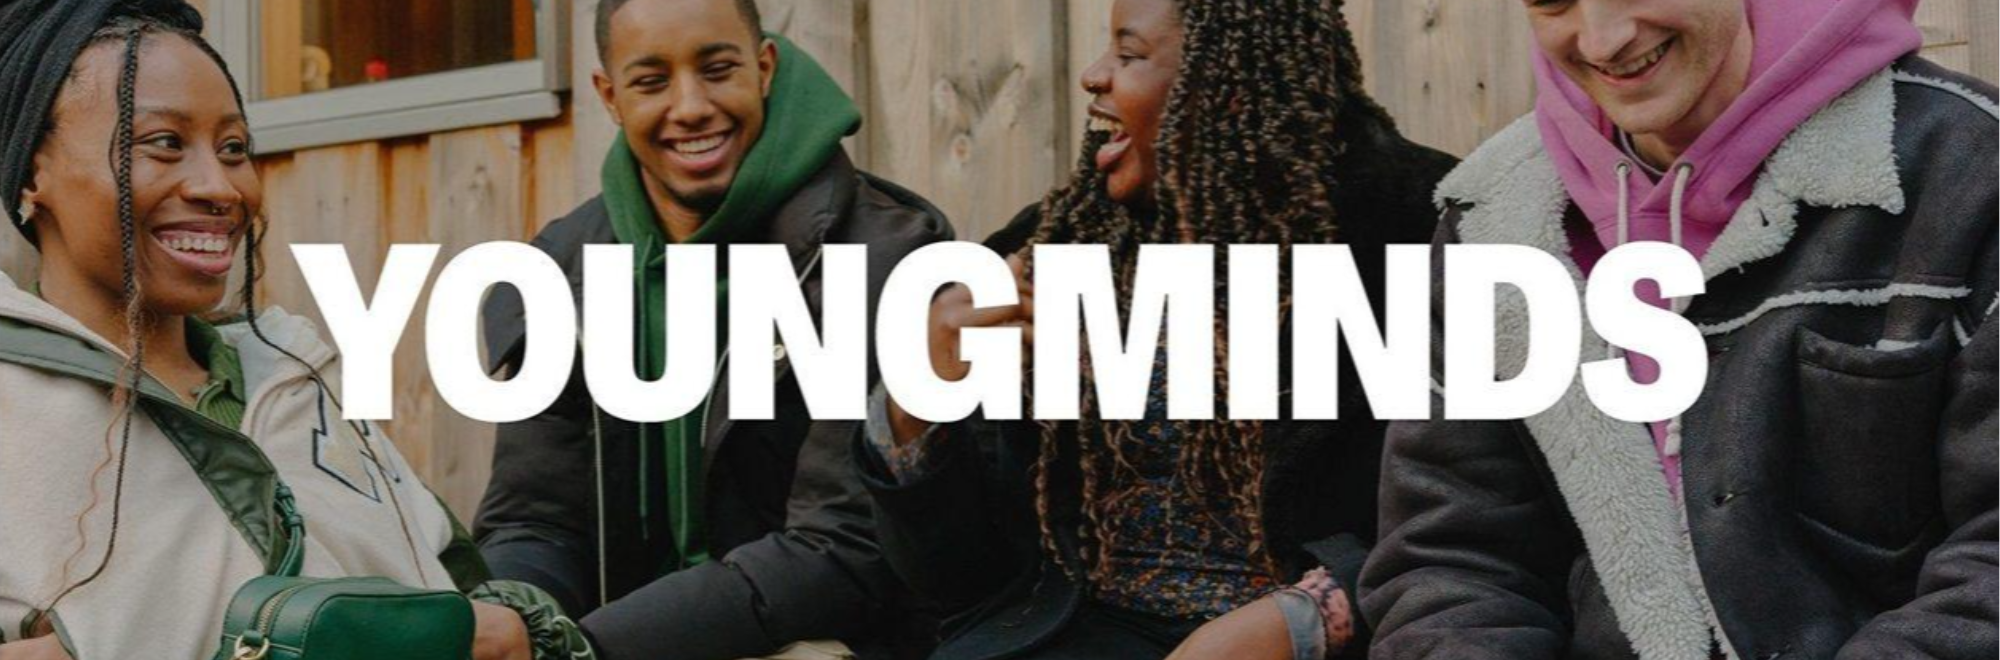 YoungMinds unveil new branding to reach more young people and amplify marginalised voices